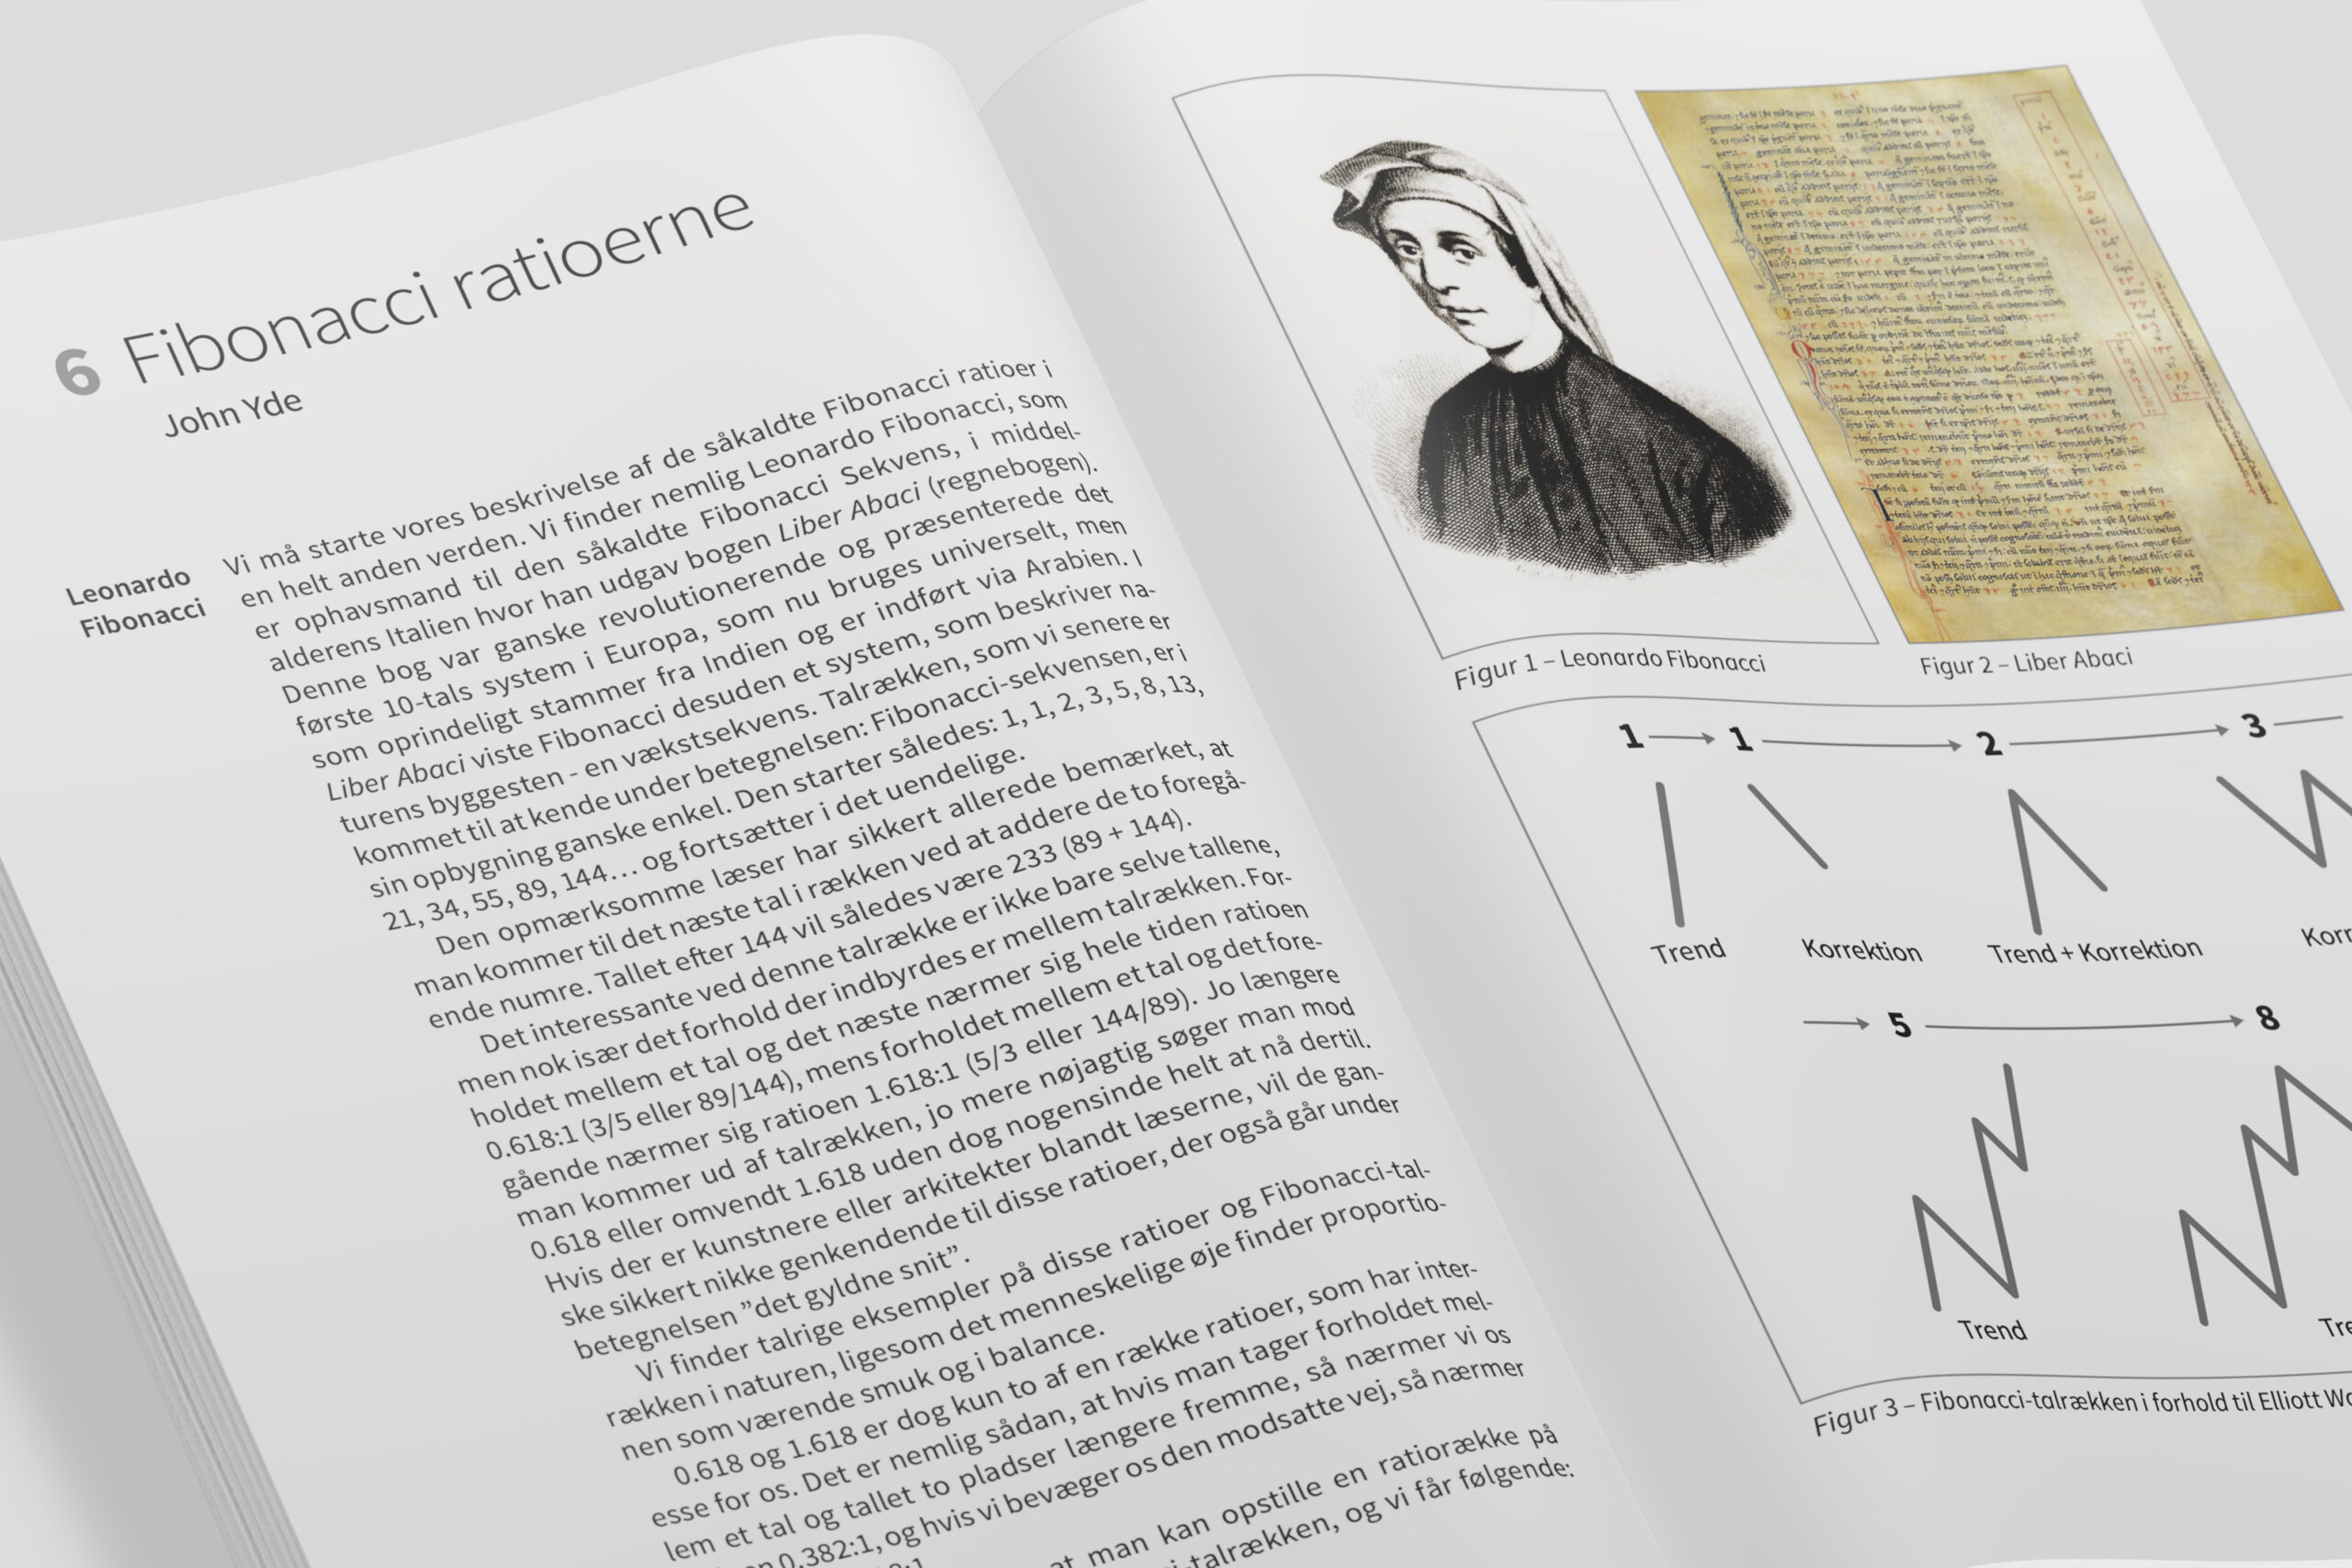 A close-cropped image of a double page spread from Finansielle Markedsanalysers Anatomi. On the right-hand page are images of Fibonnaci, a sample page from his works and a schematic diagram.